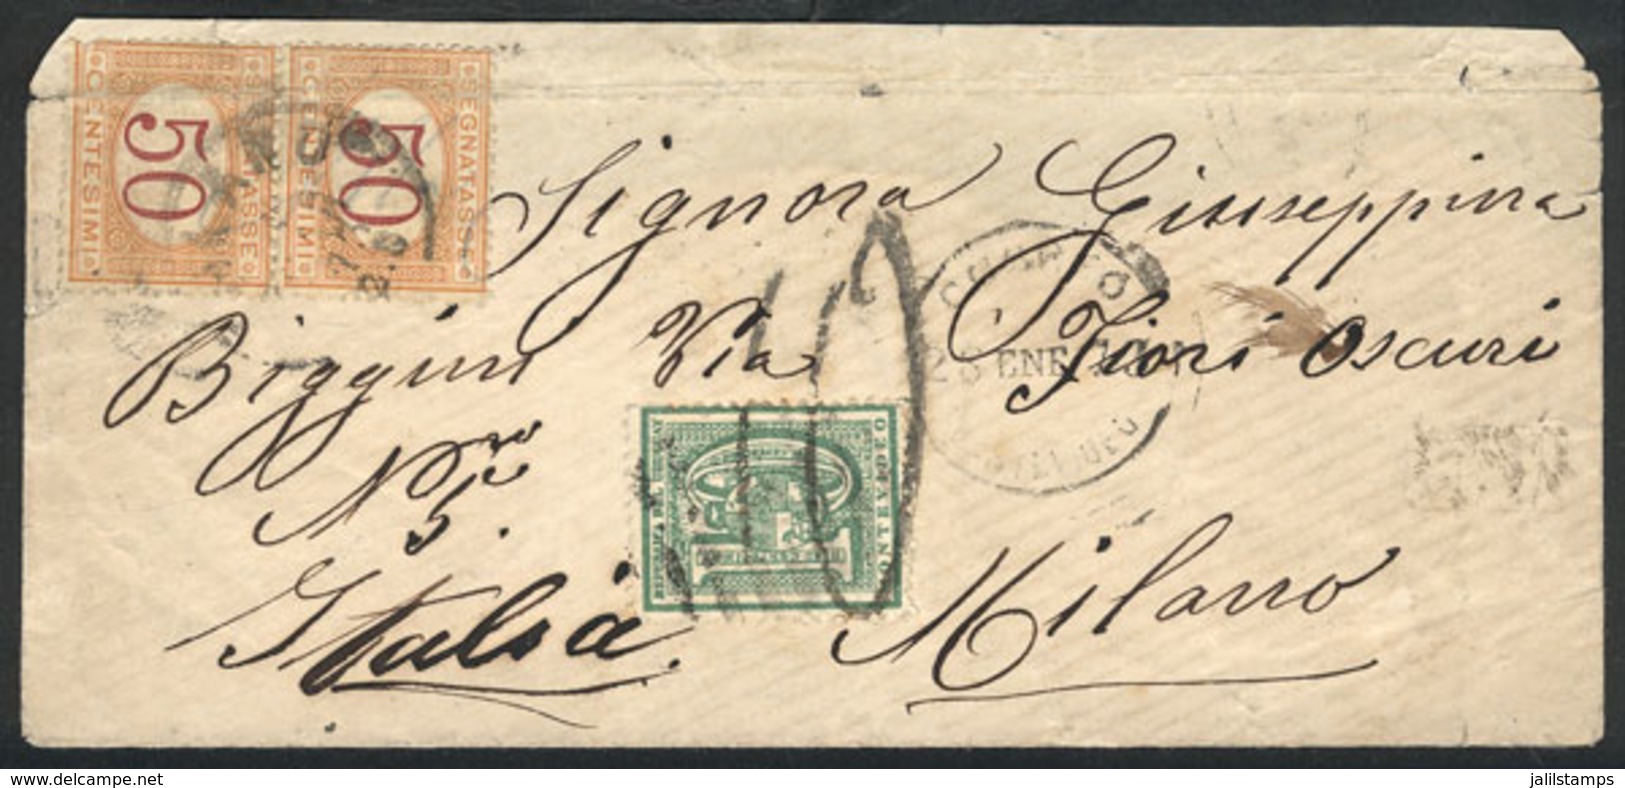 URUGUAY: 28/JA/1873 Montevideo-Italy, Cover With Yv.36 And Italian Postage Due Stamp For 1L., Good Cancels! - Uruguay